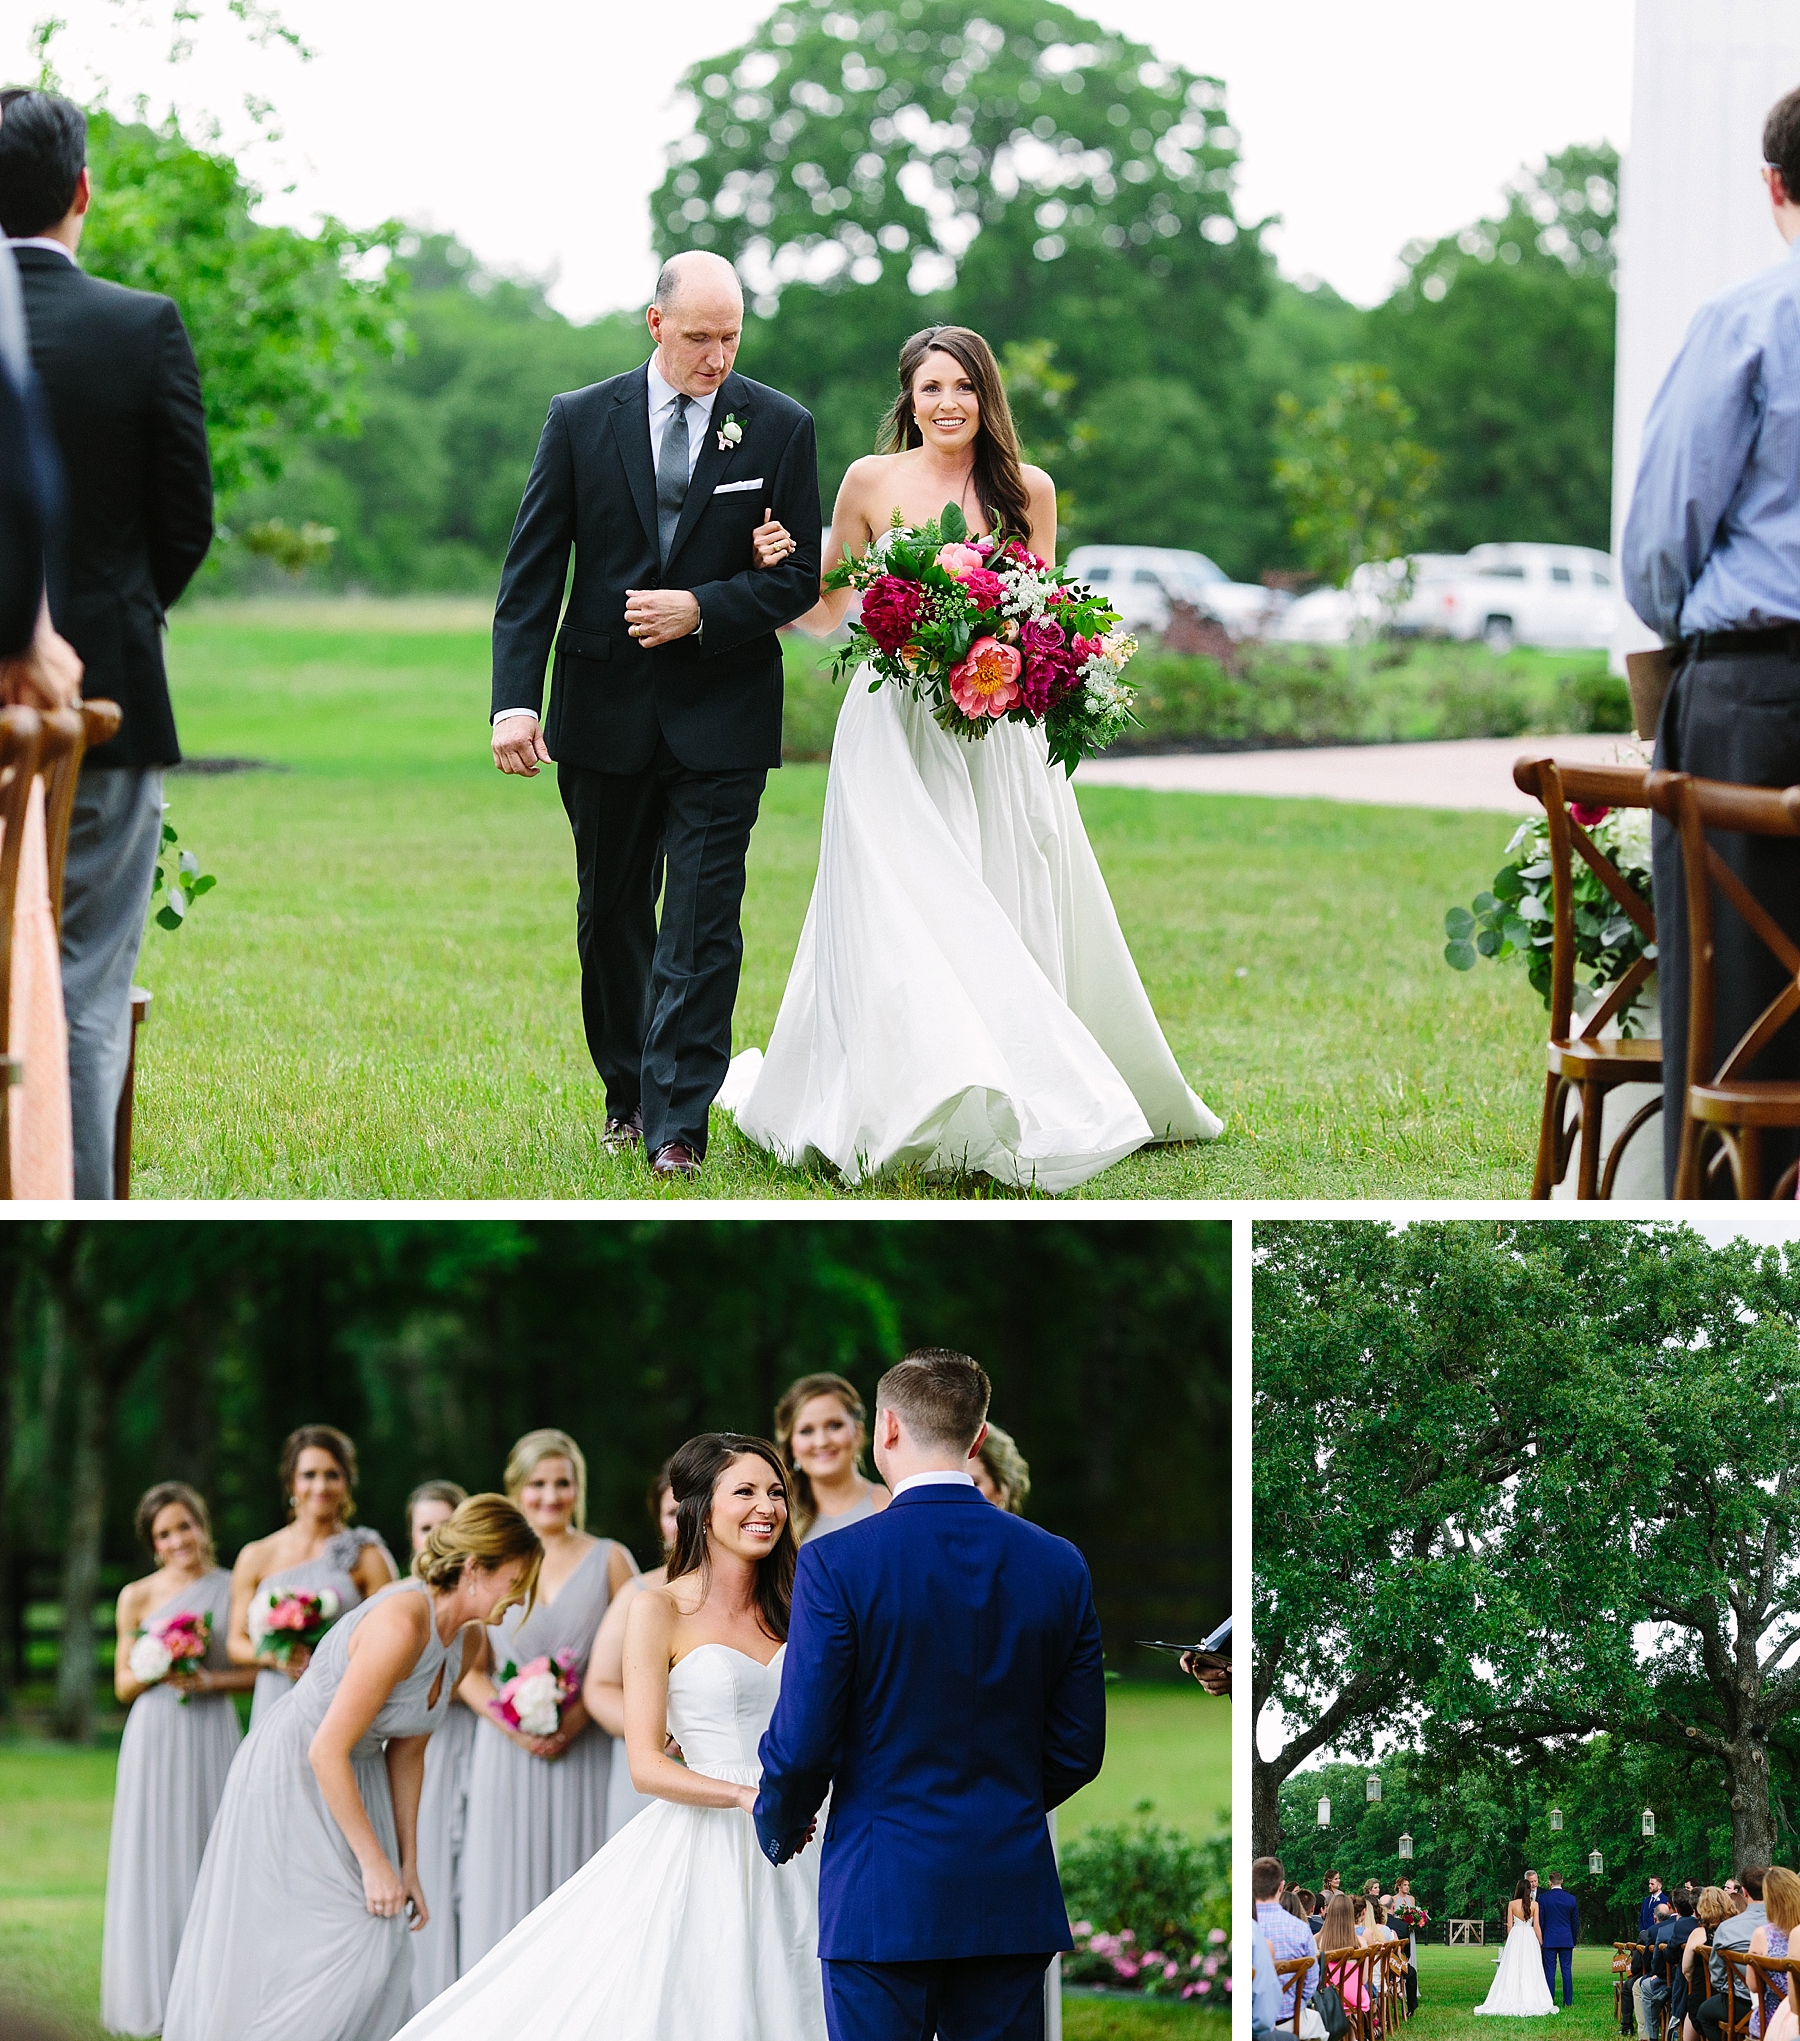 Chandler and Michael's White Sparrow Barn Wedding